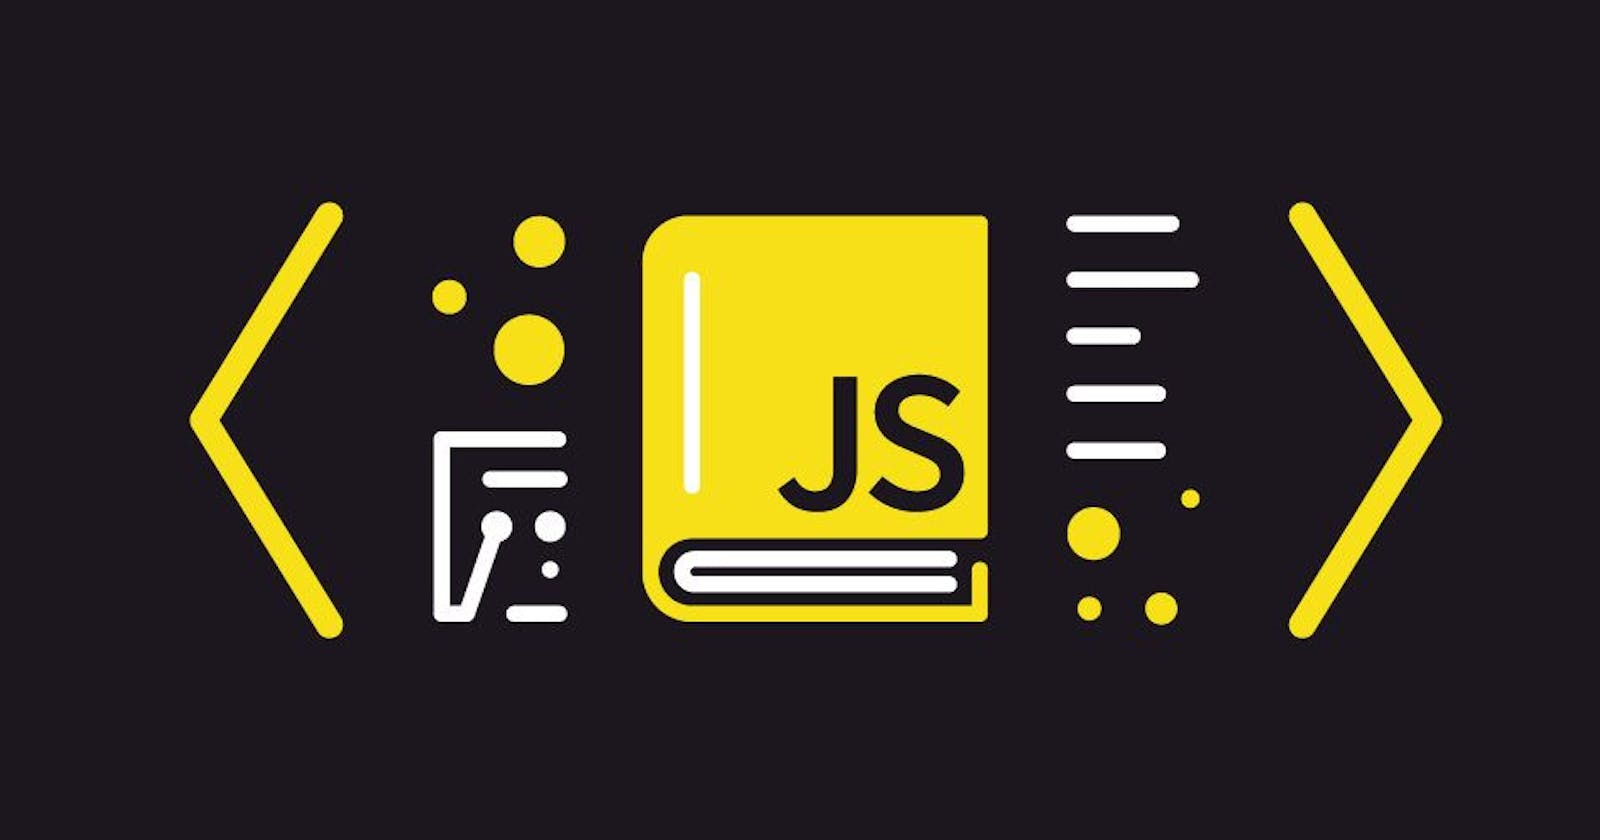 3 ways to convert a string into a number in JS